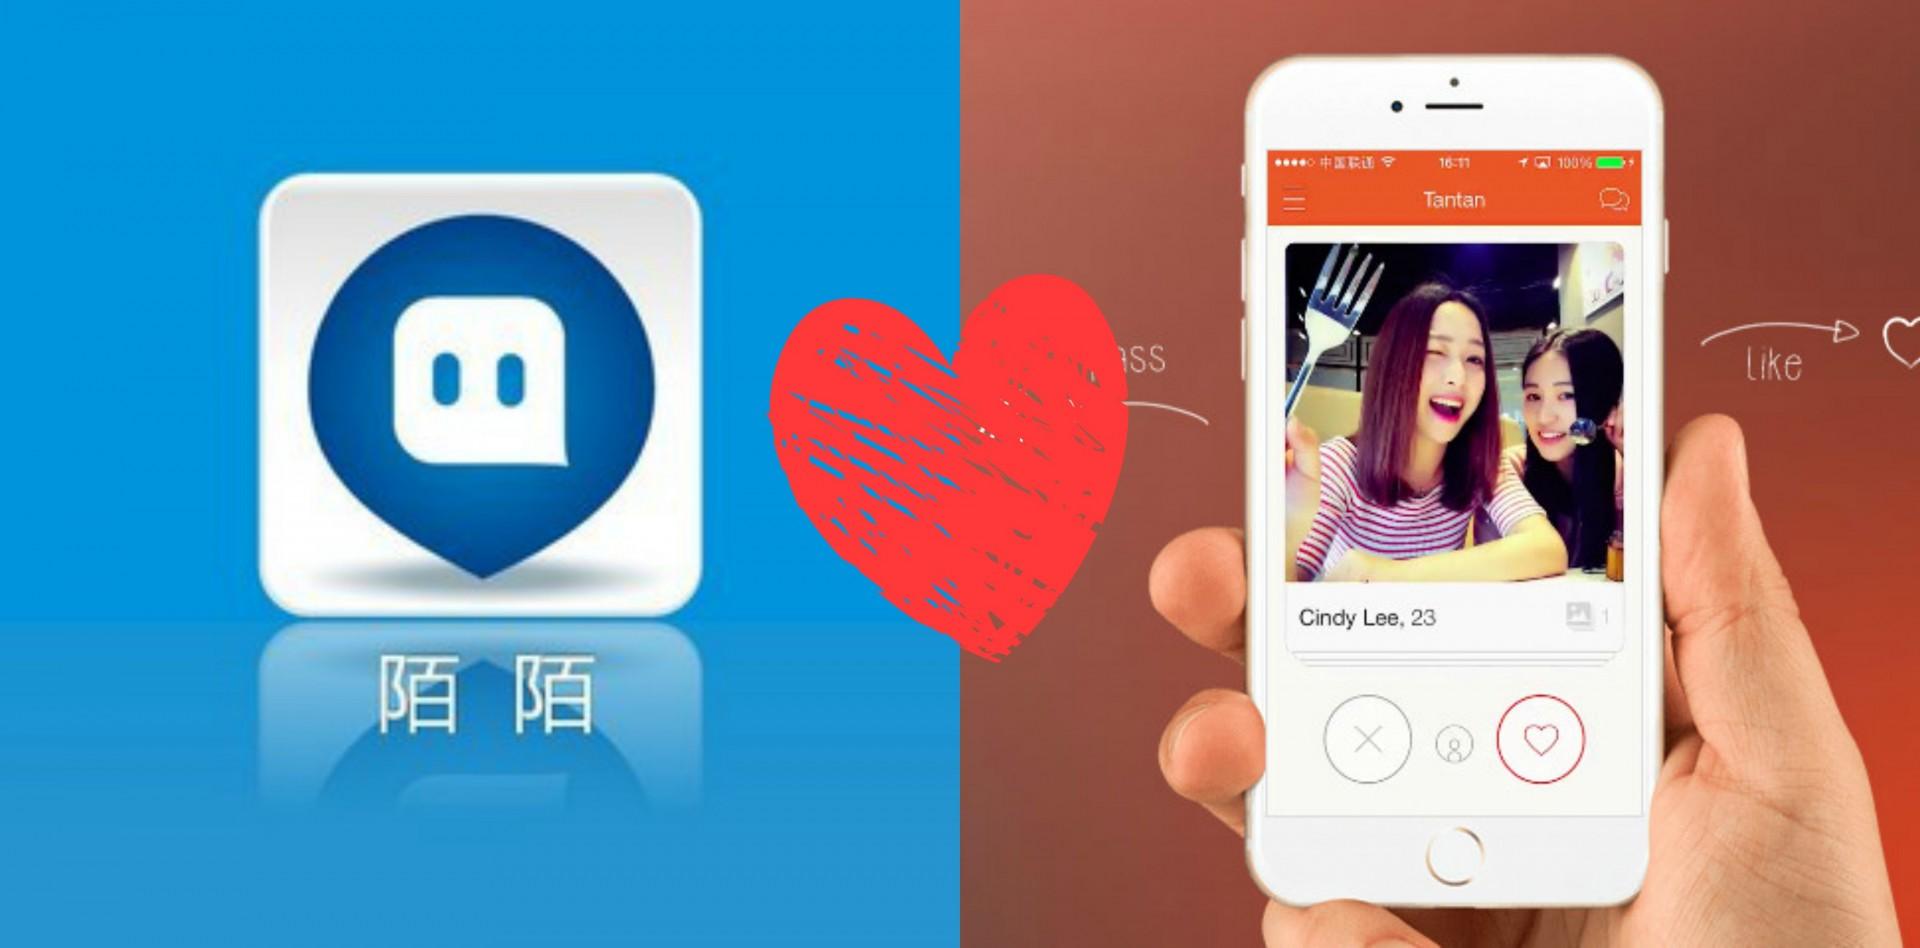 Momo is the online dating leader in China with its live-streaming platform Momo...